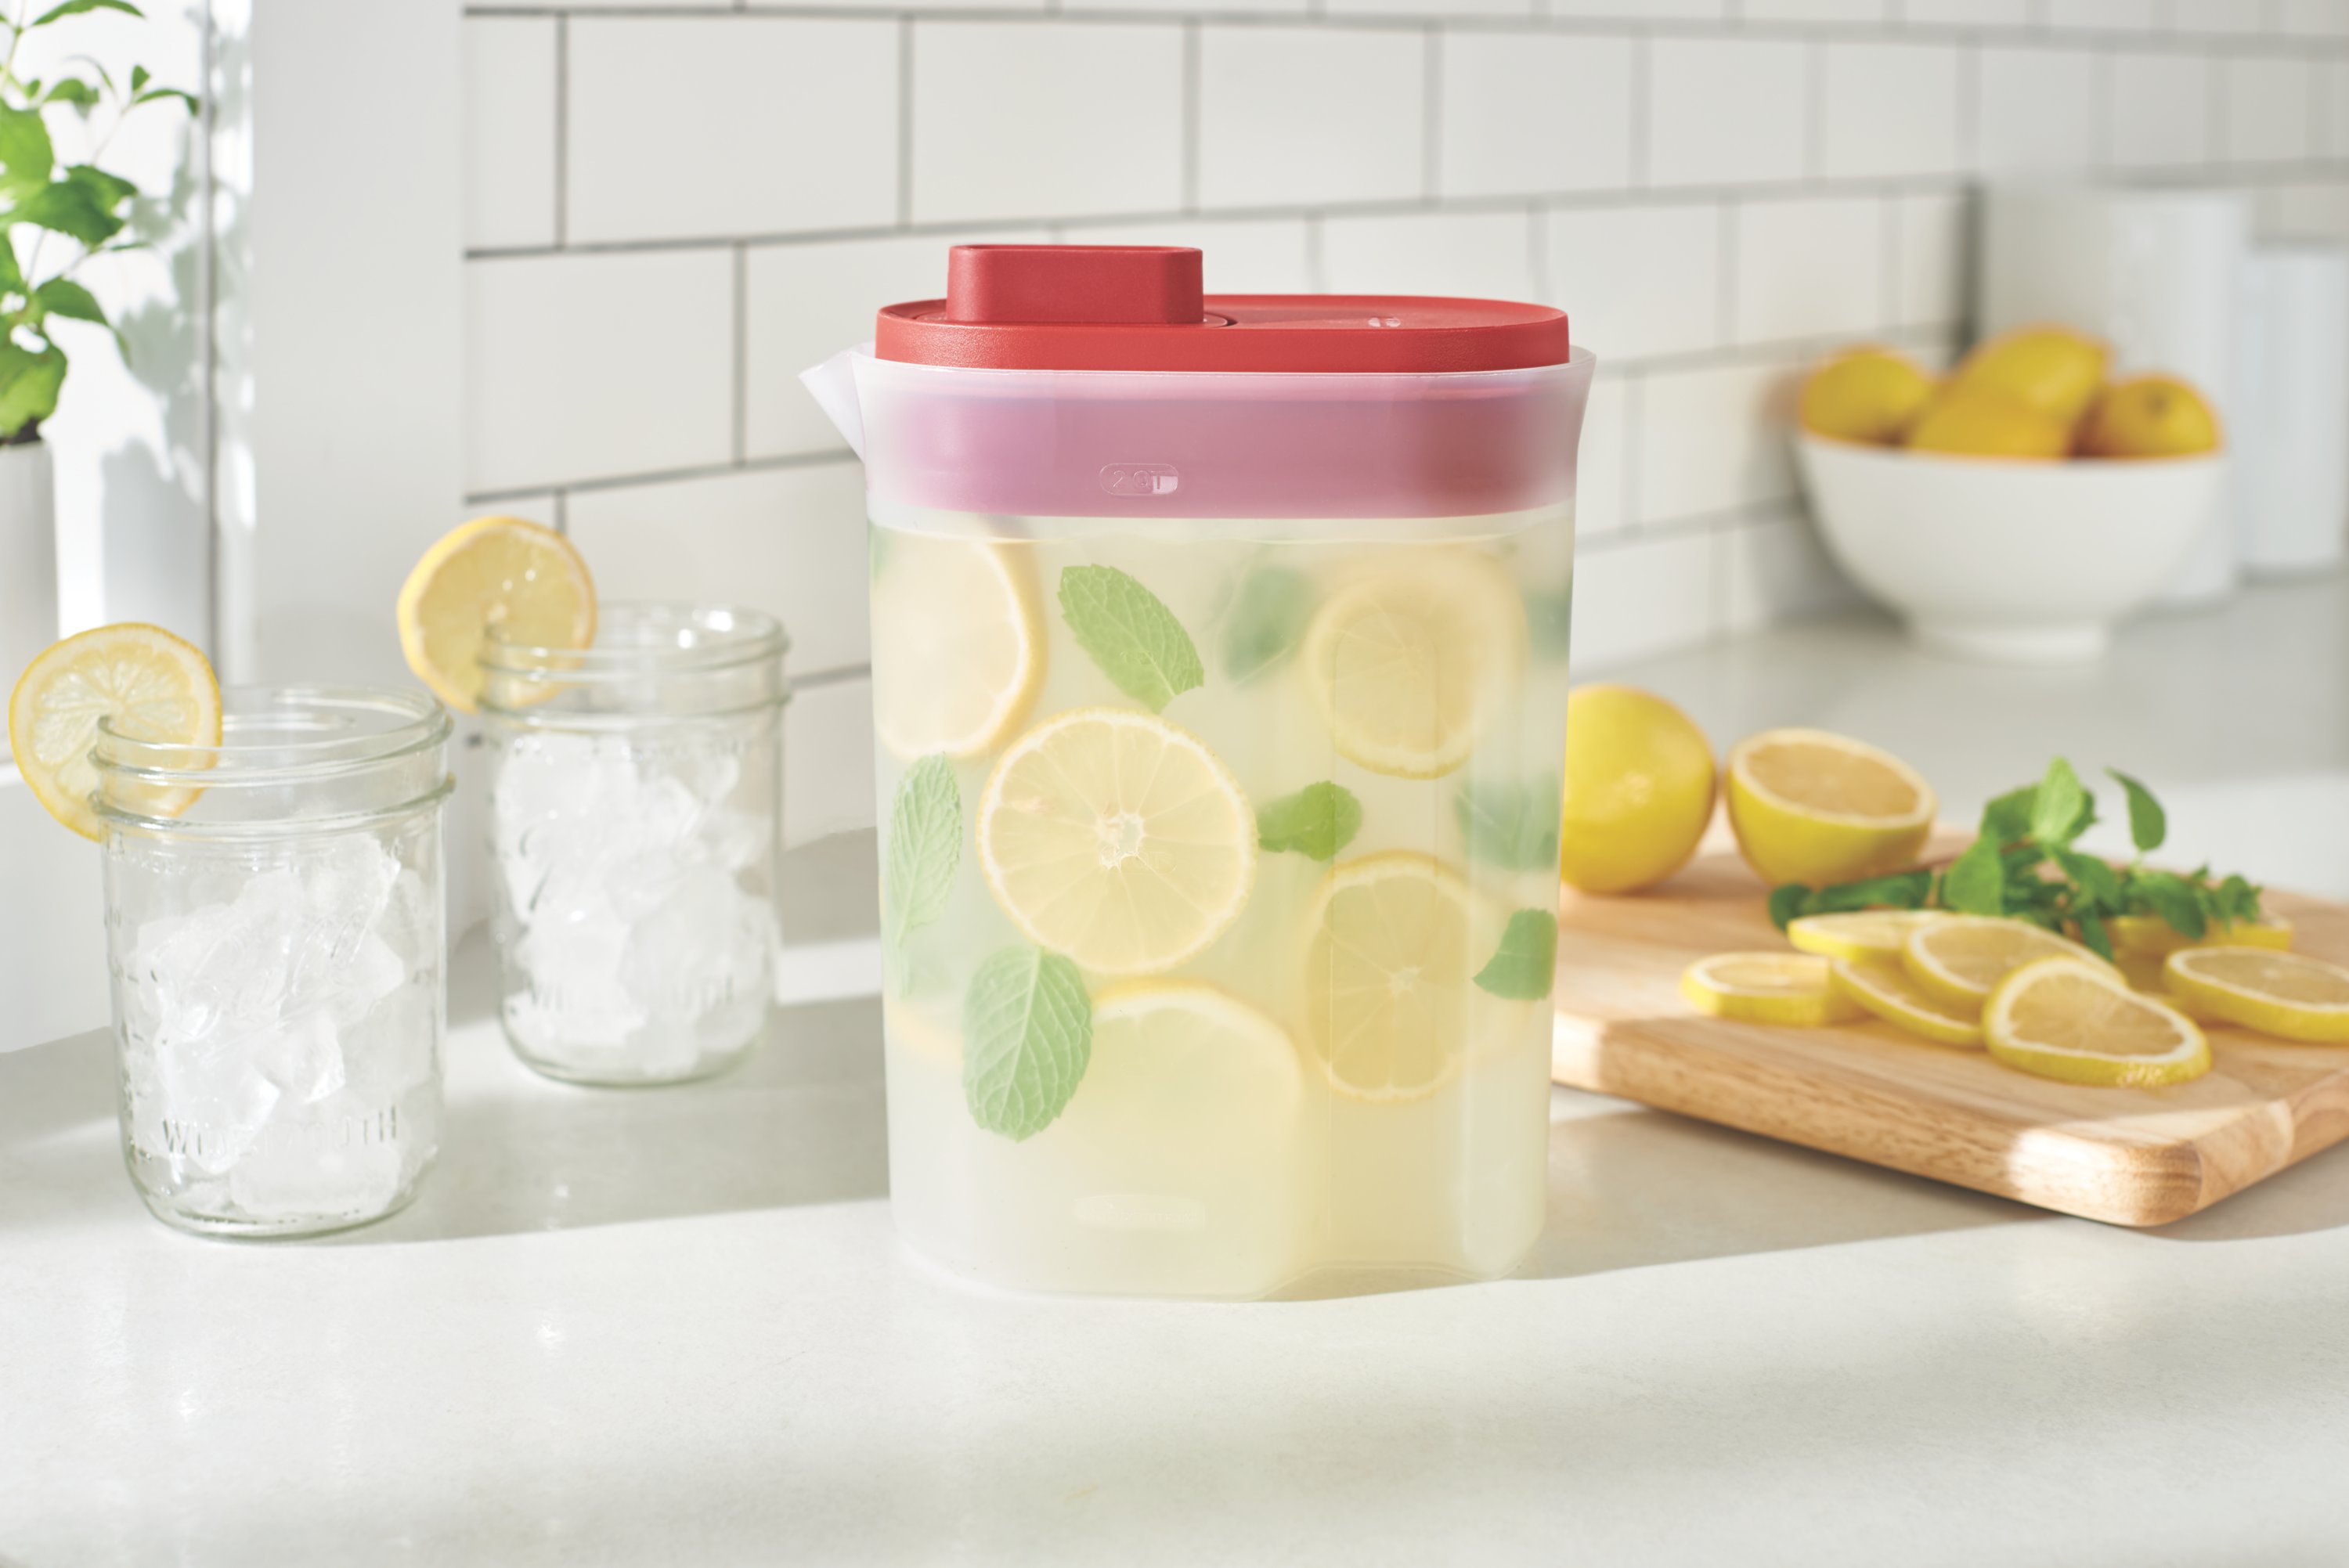 https://s7d9.scene7.com/is/image/NewellRubbermaid/2122589-rubbermaid-food-storage-ss-pitcher-premium-lid-2qt-red-kitchen-with-food-lifestyle-1